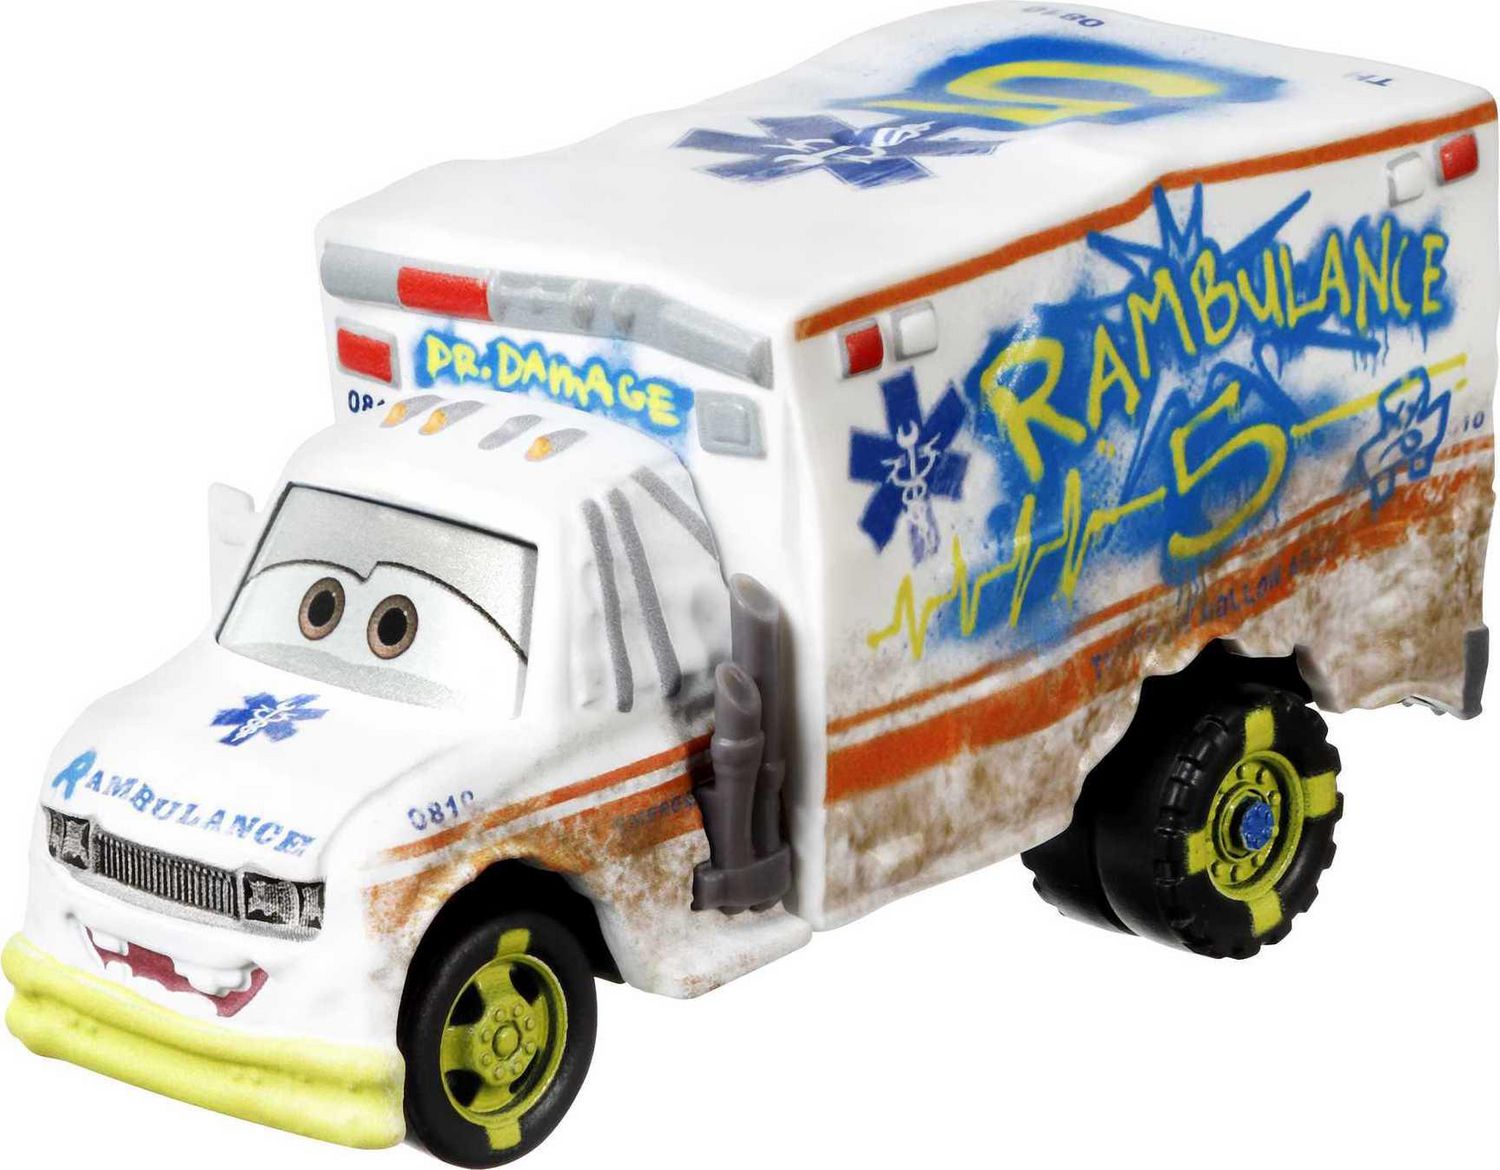 Disney Cars Toys Pixar Cars Die-Cast Oversized Dr Damage Vehicle Collectible Toy Truck Gifts for Kids Age 3 and Older Multi 